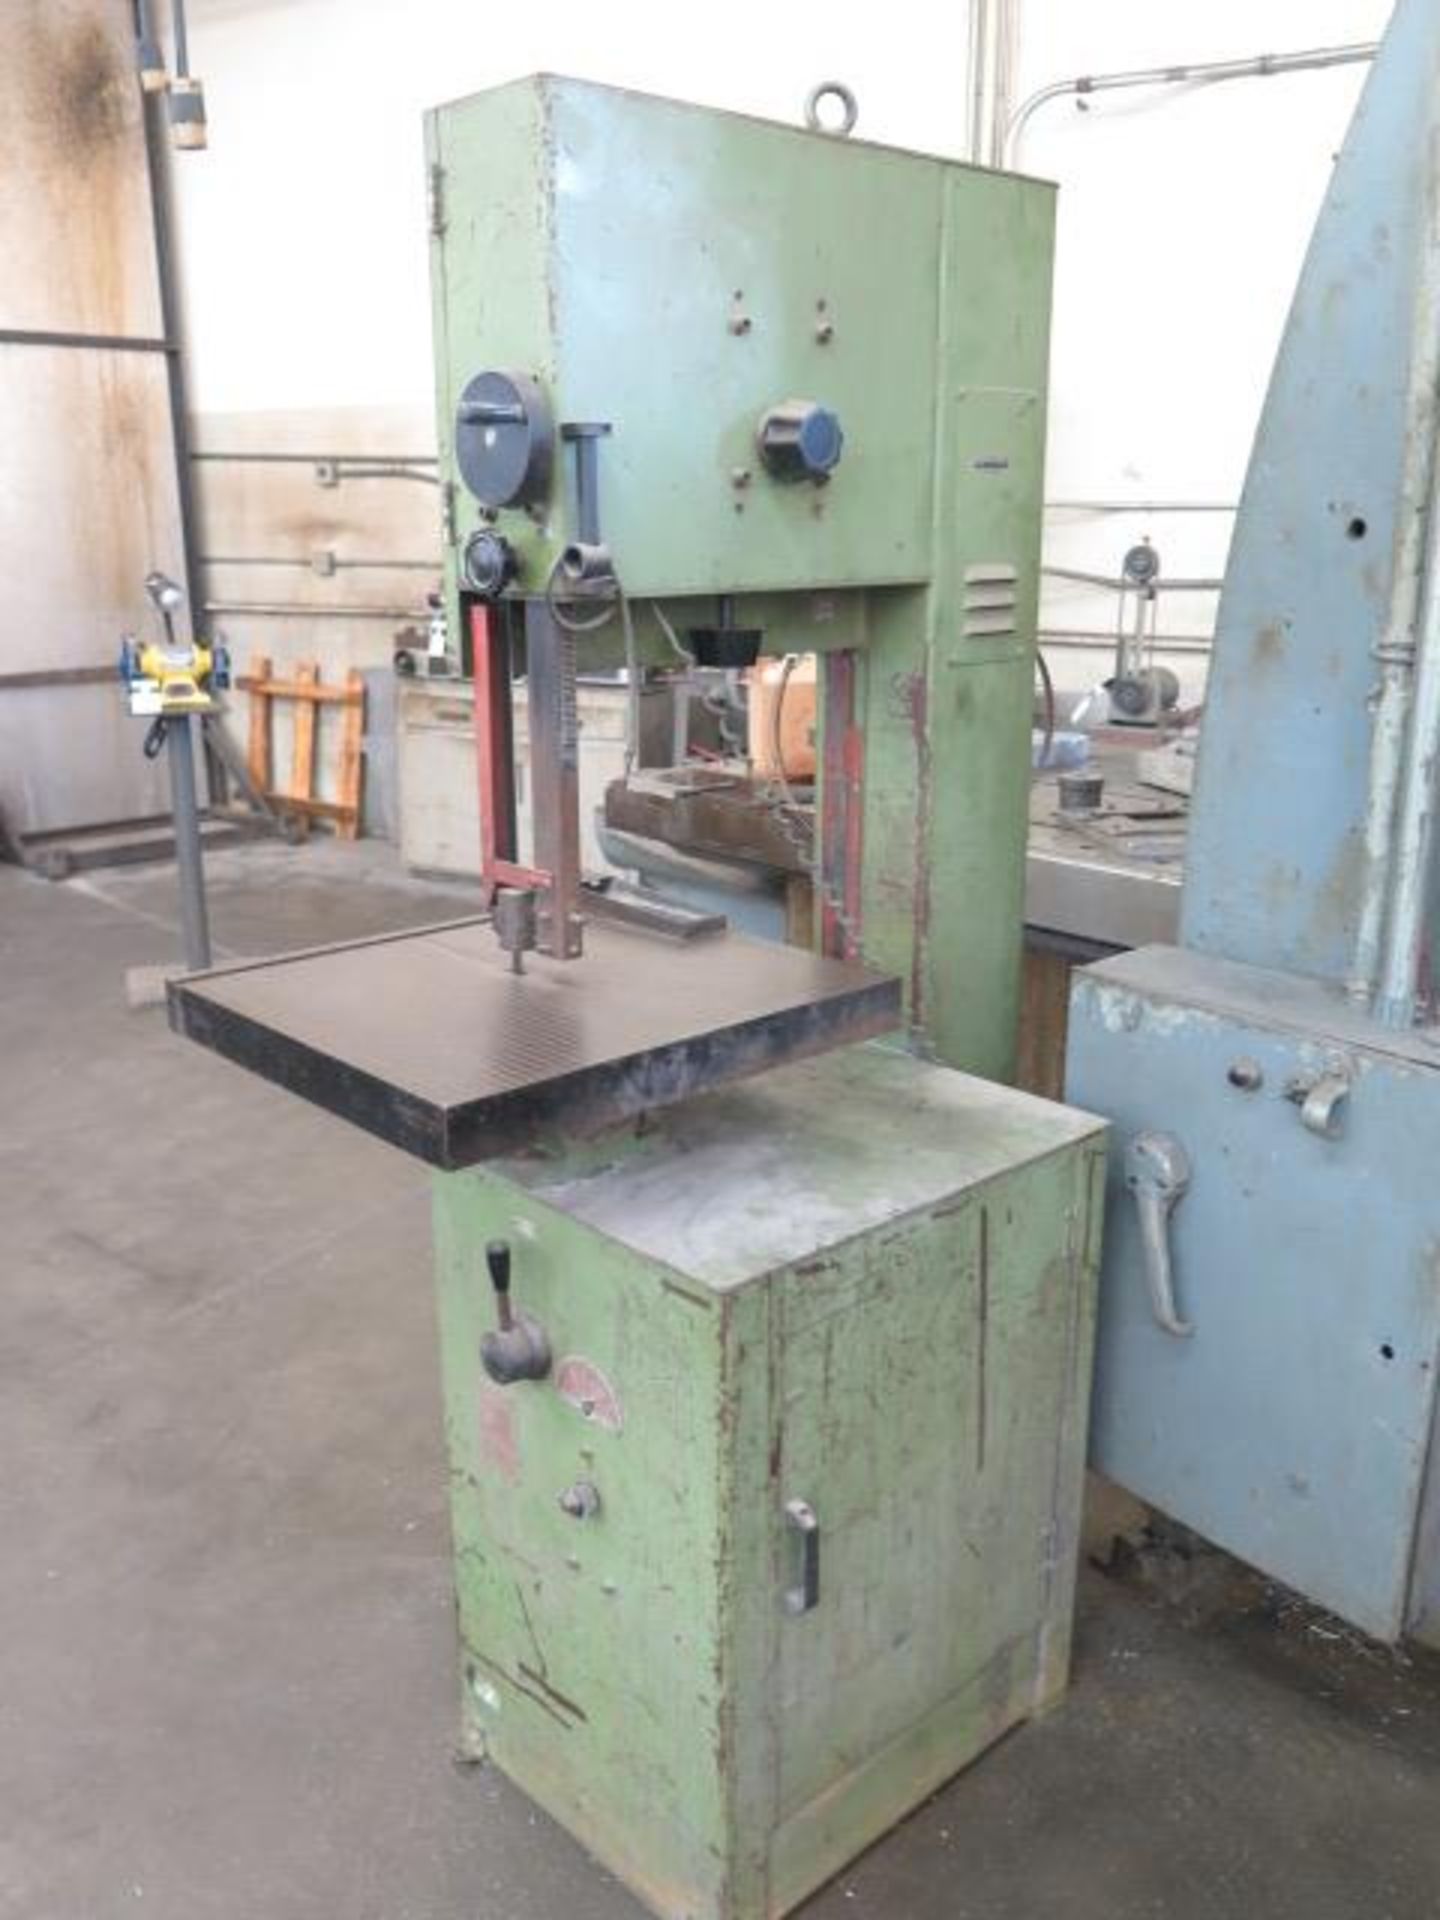 Import 20” Vertical Band Saw w/ Blade Welder, 22” x 23 ½” Table (SOLD AS-IS - NO WARRANTY) - Image 3 of 10